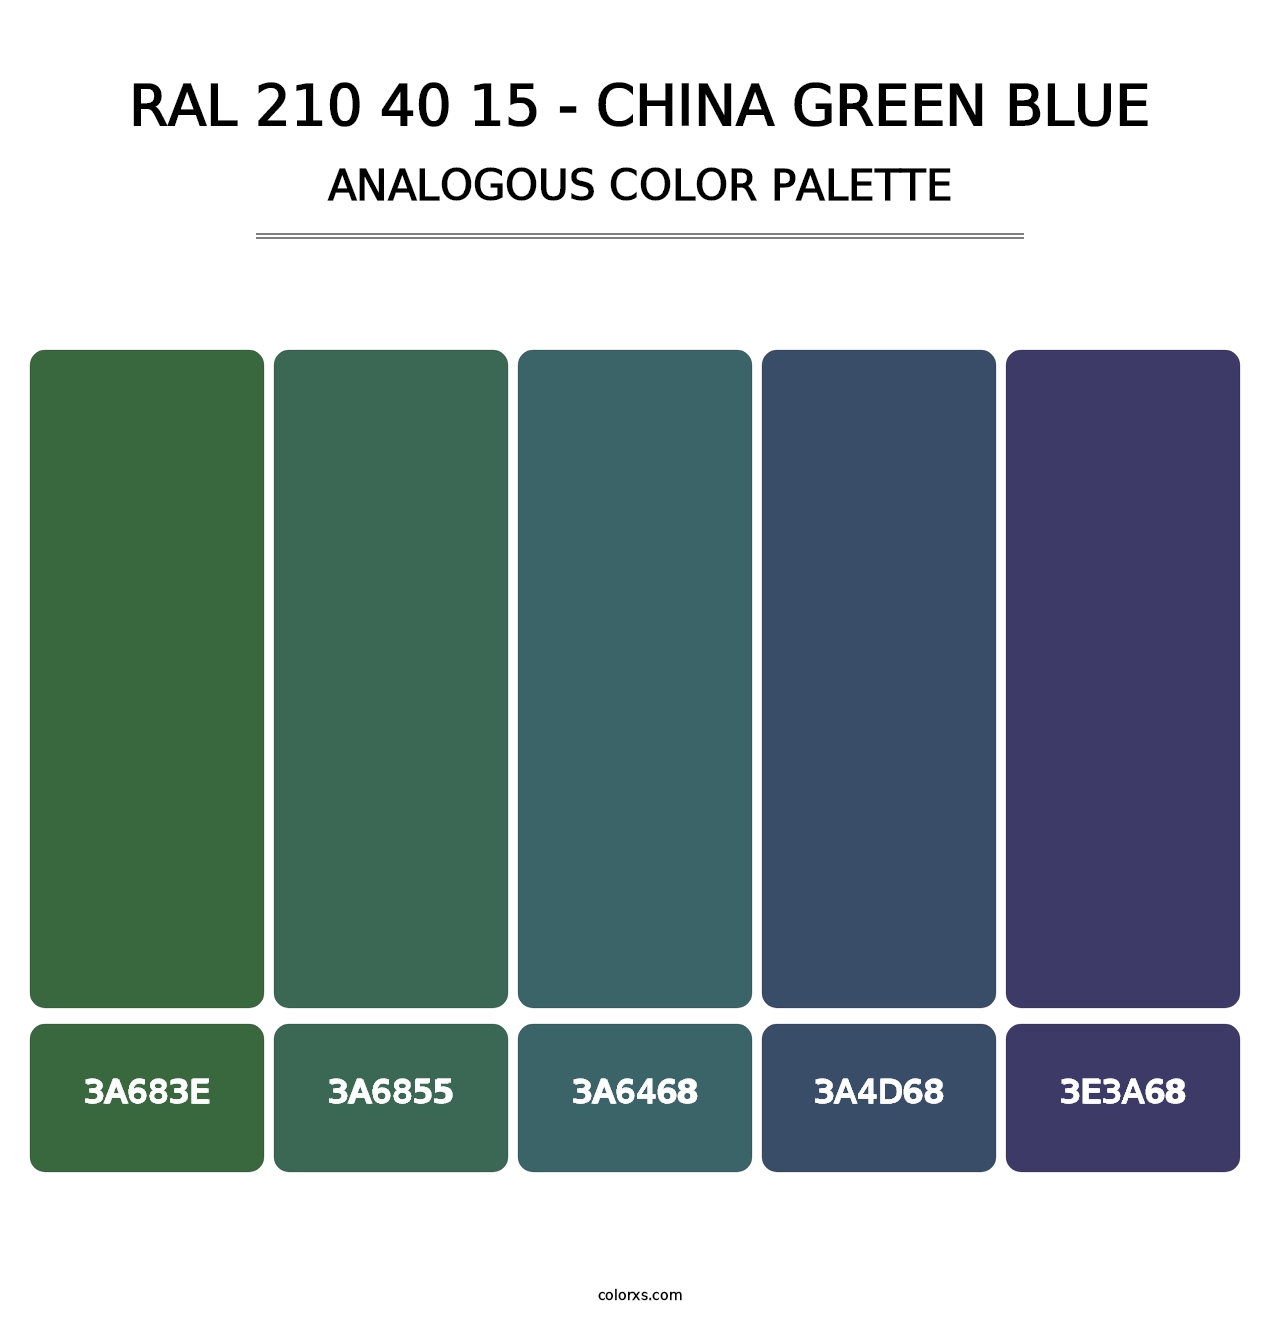 RAL 210 40 15 - China Green Blue - Analogous Color Palette